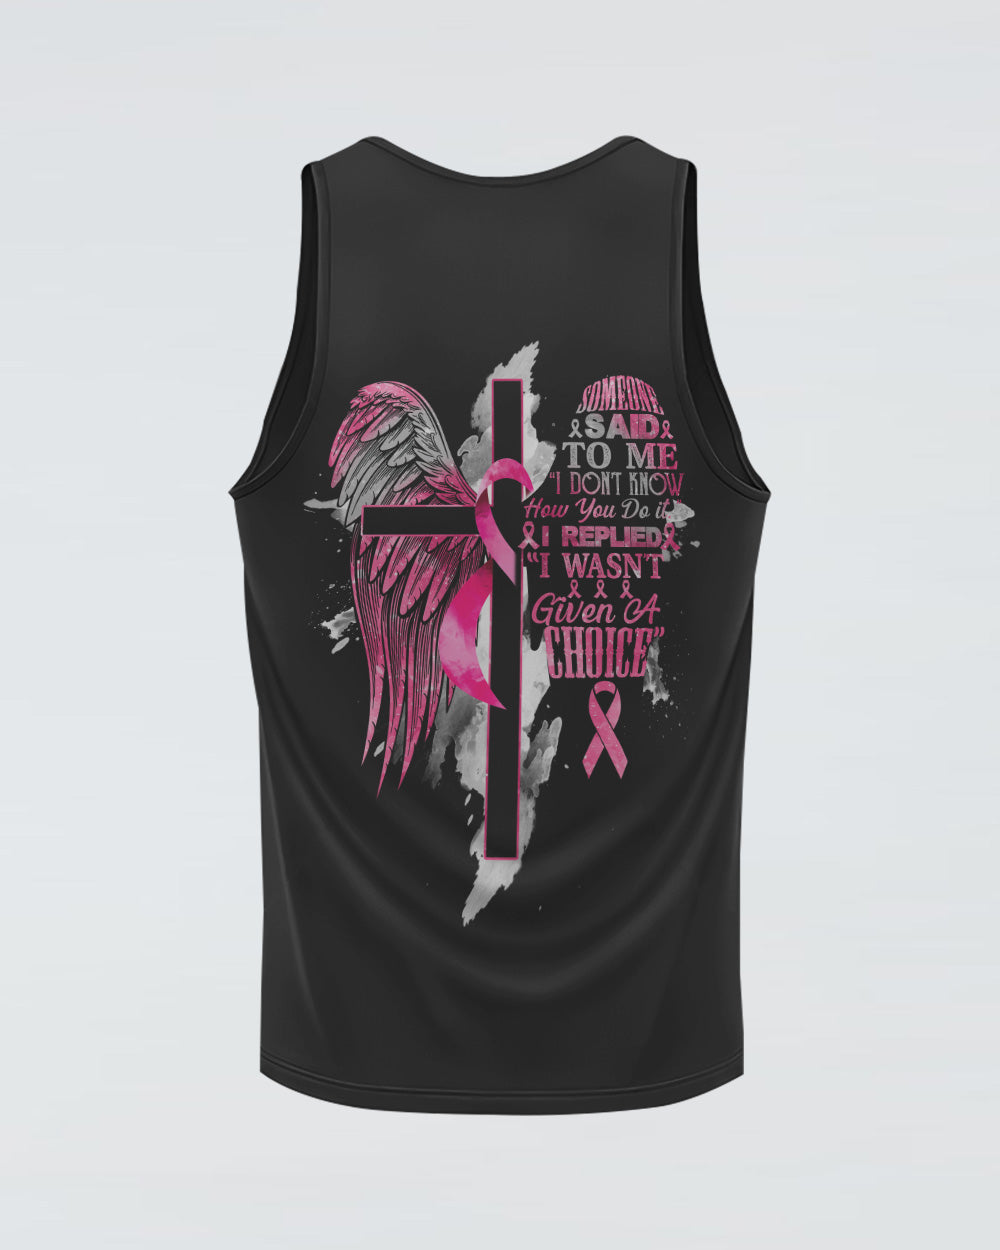 I Wasn't Given A Choice Half Wings Pink Ribbons Women's Breast Cancer Awareness Tanks